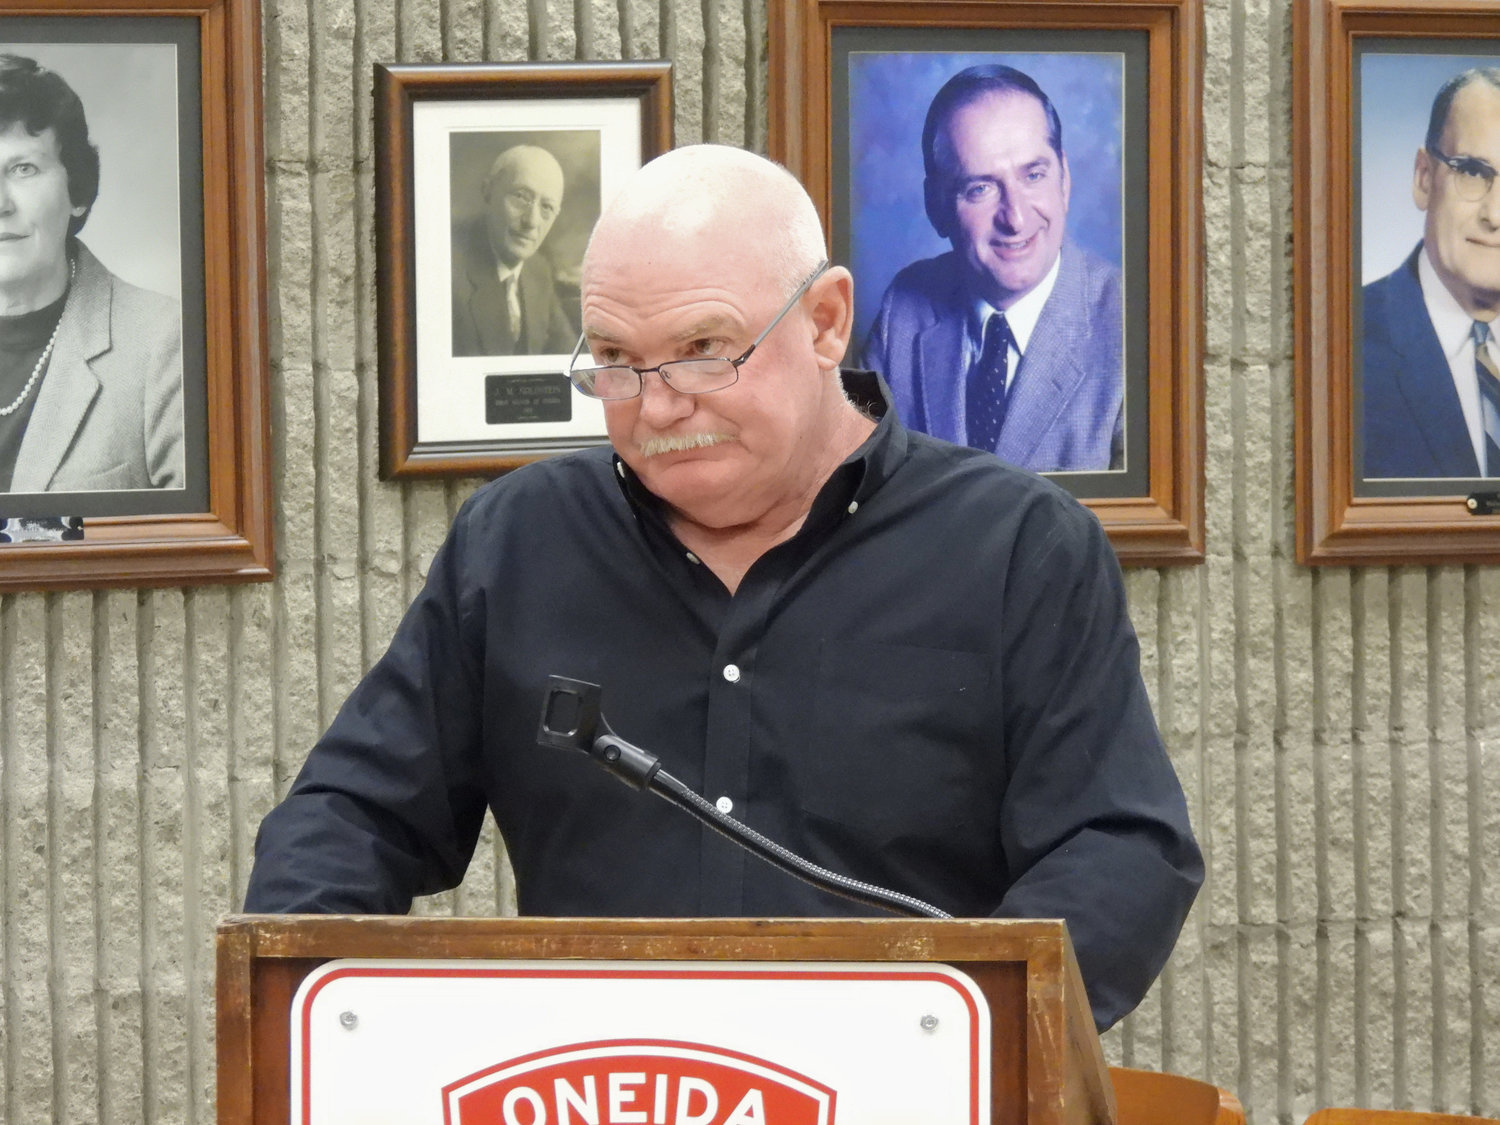 Oneida resident Randy Jones discusses the need for transparency during the public comment portion of the Oneida Common Council meeting on Tuesday.